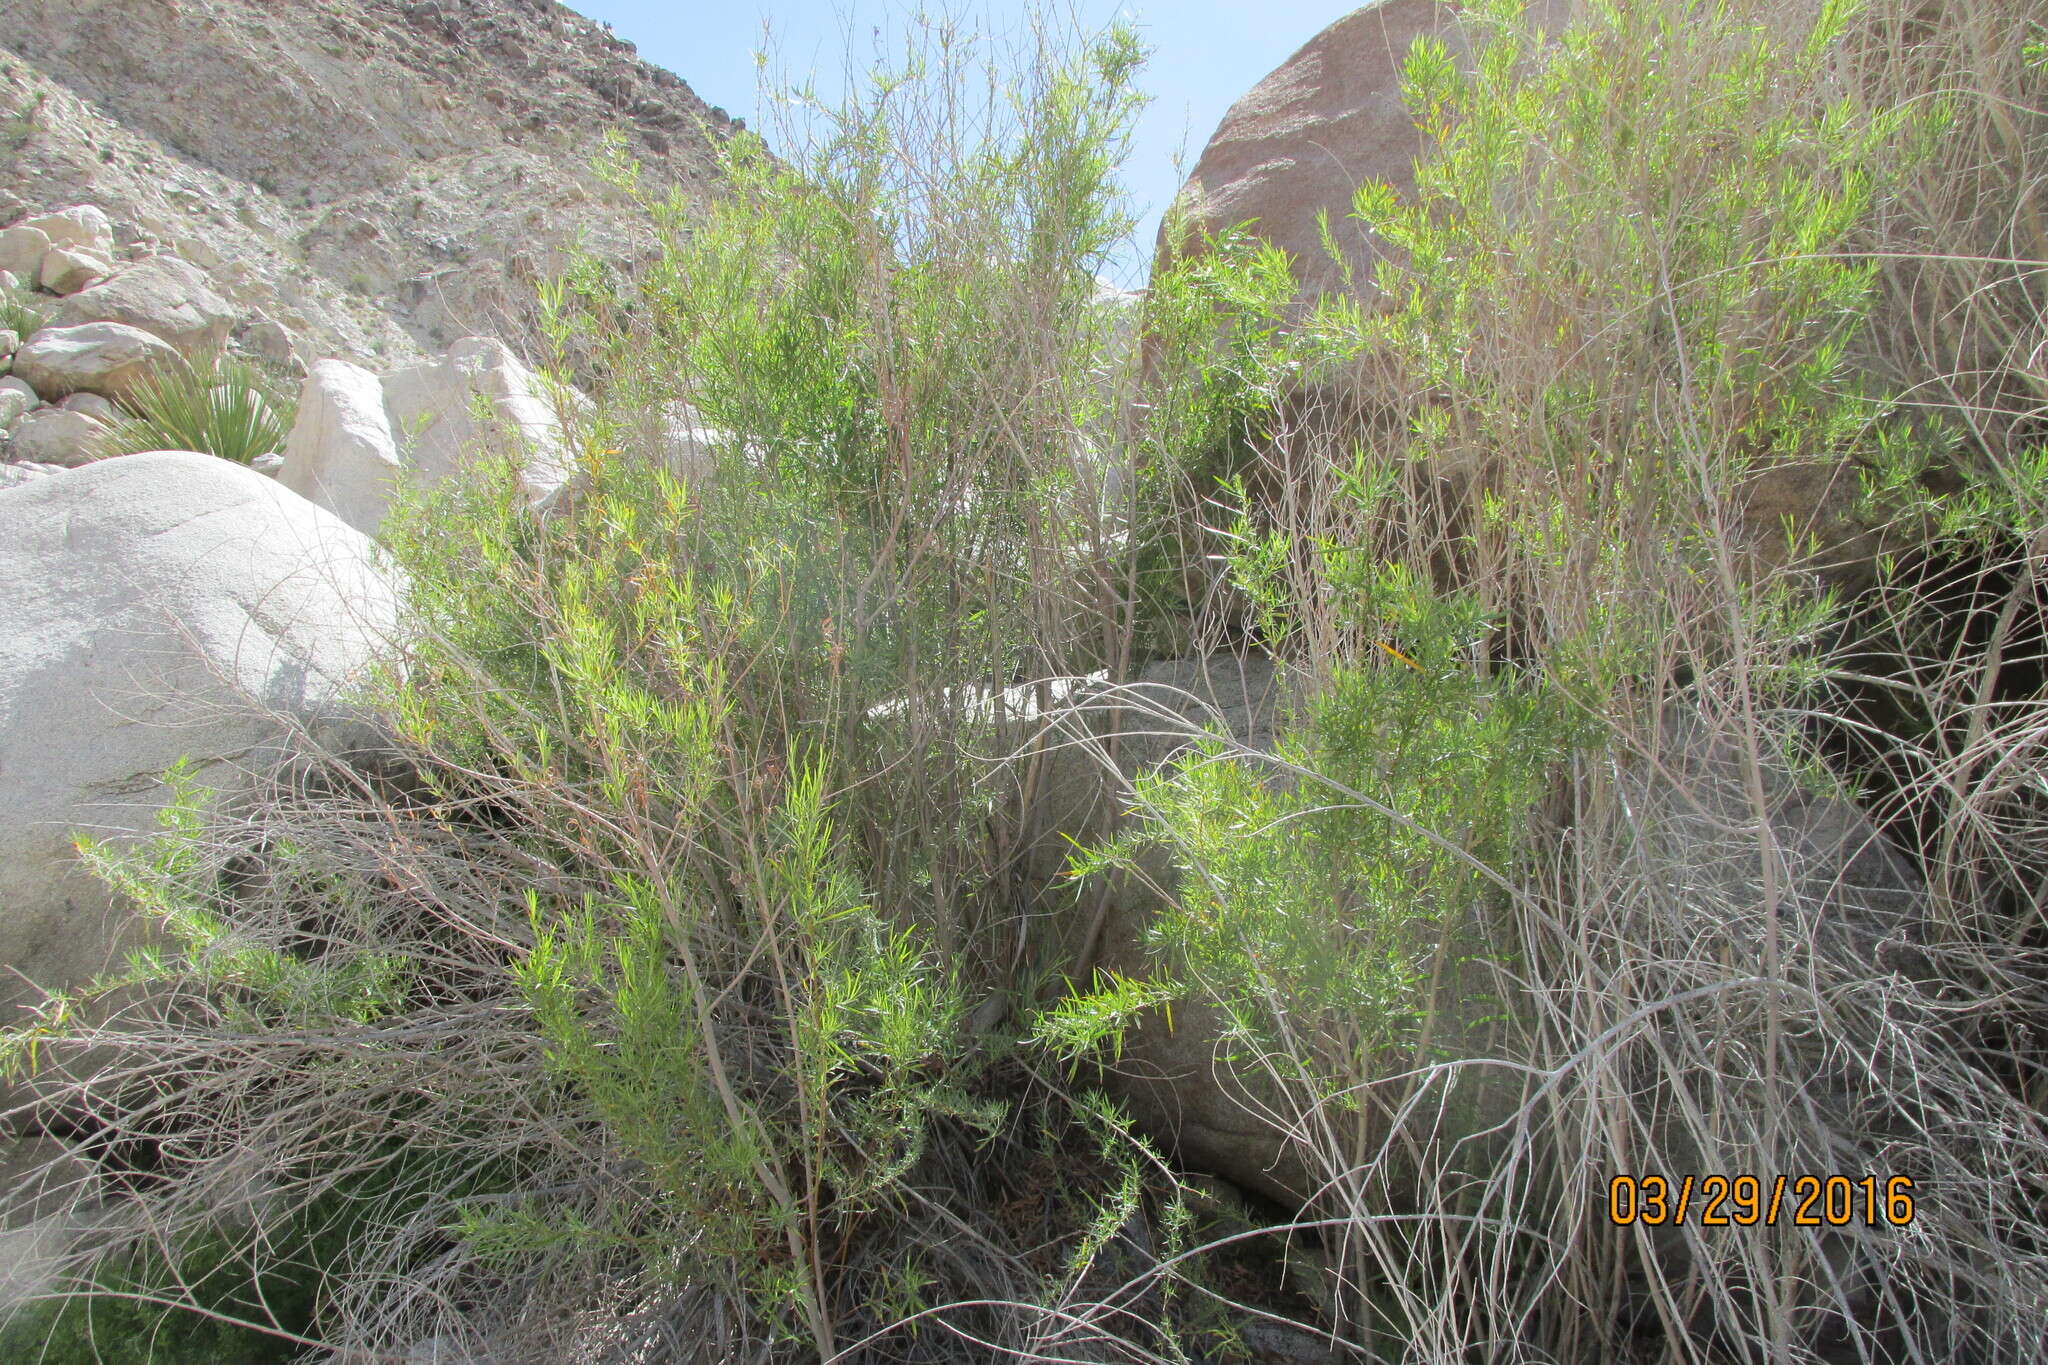 Image of narrowleaf willow